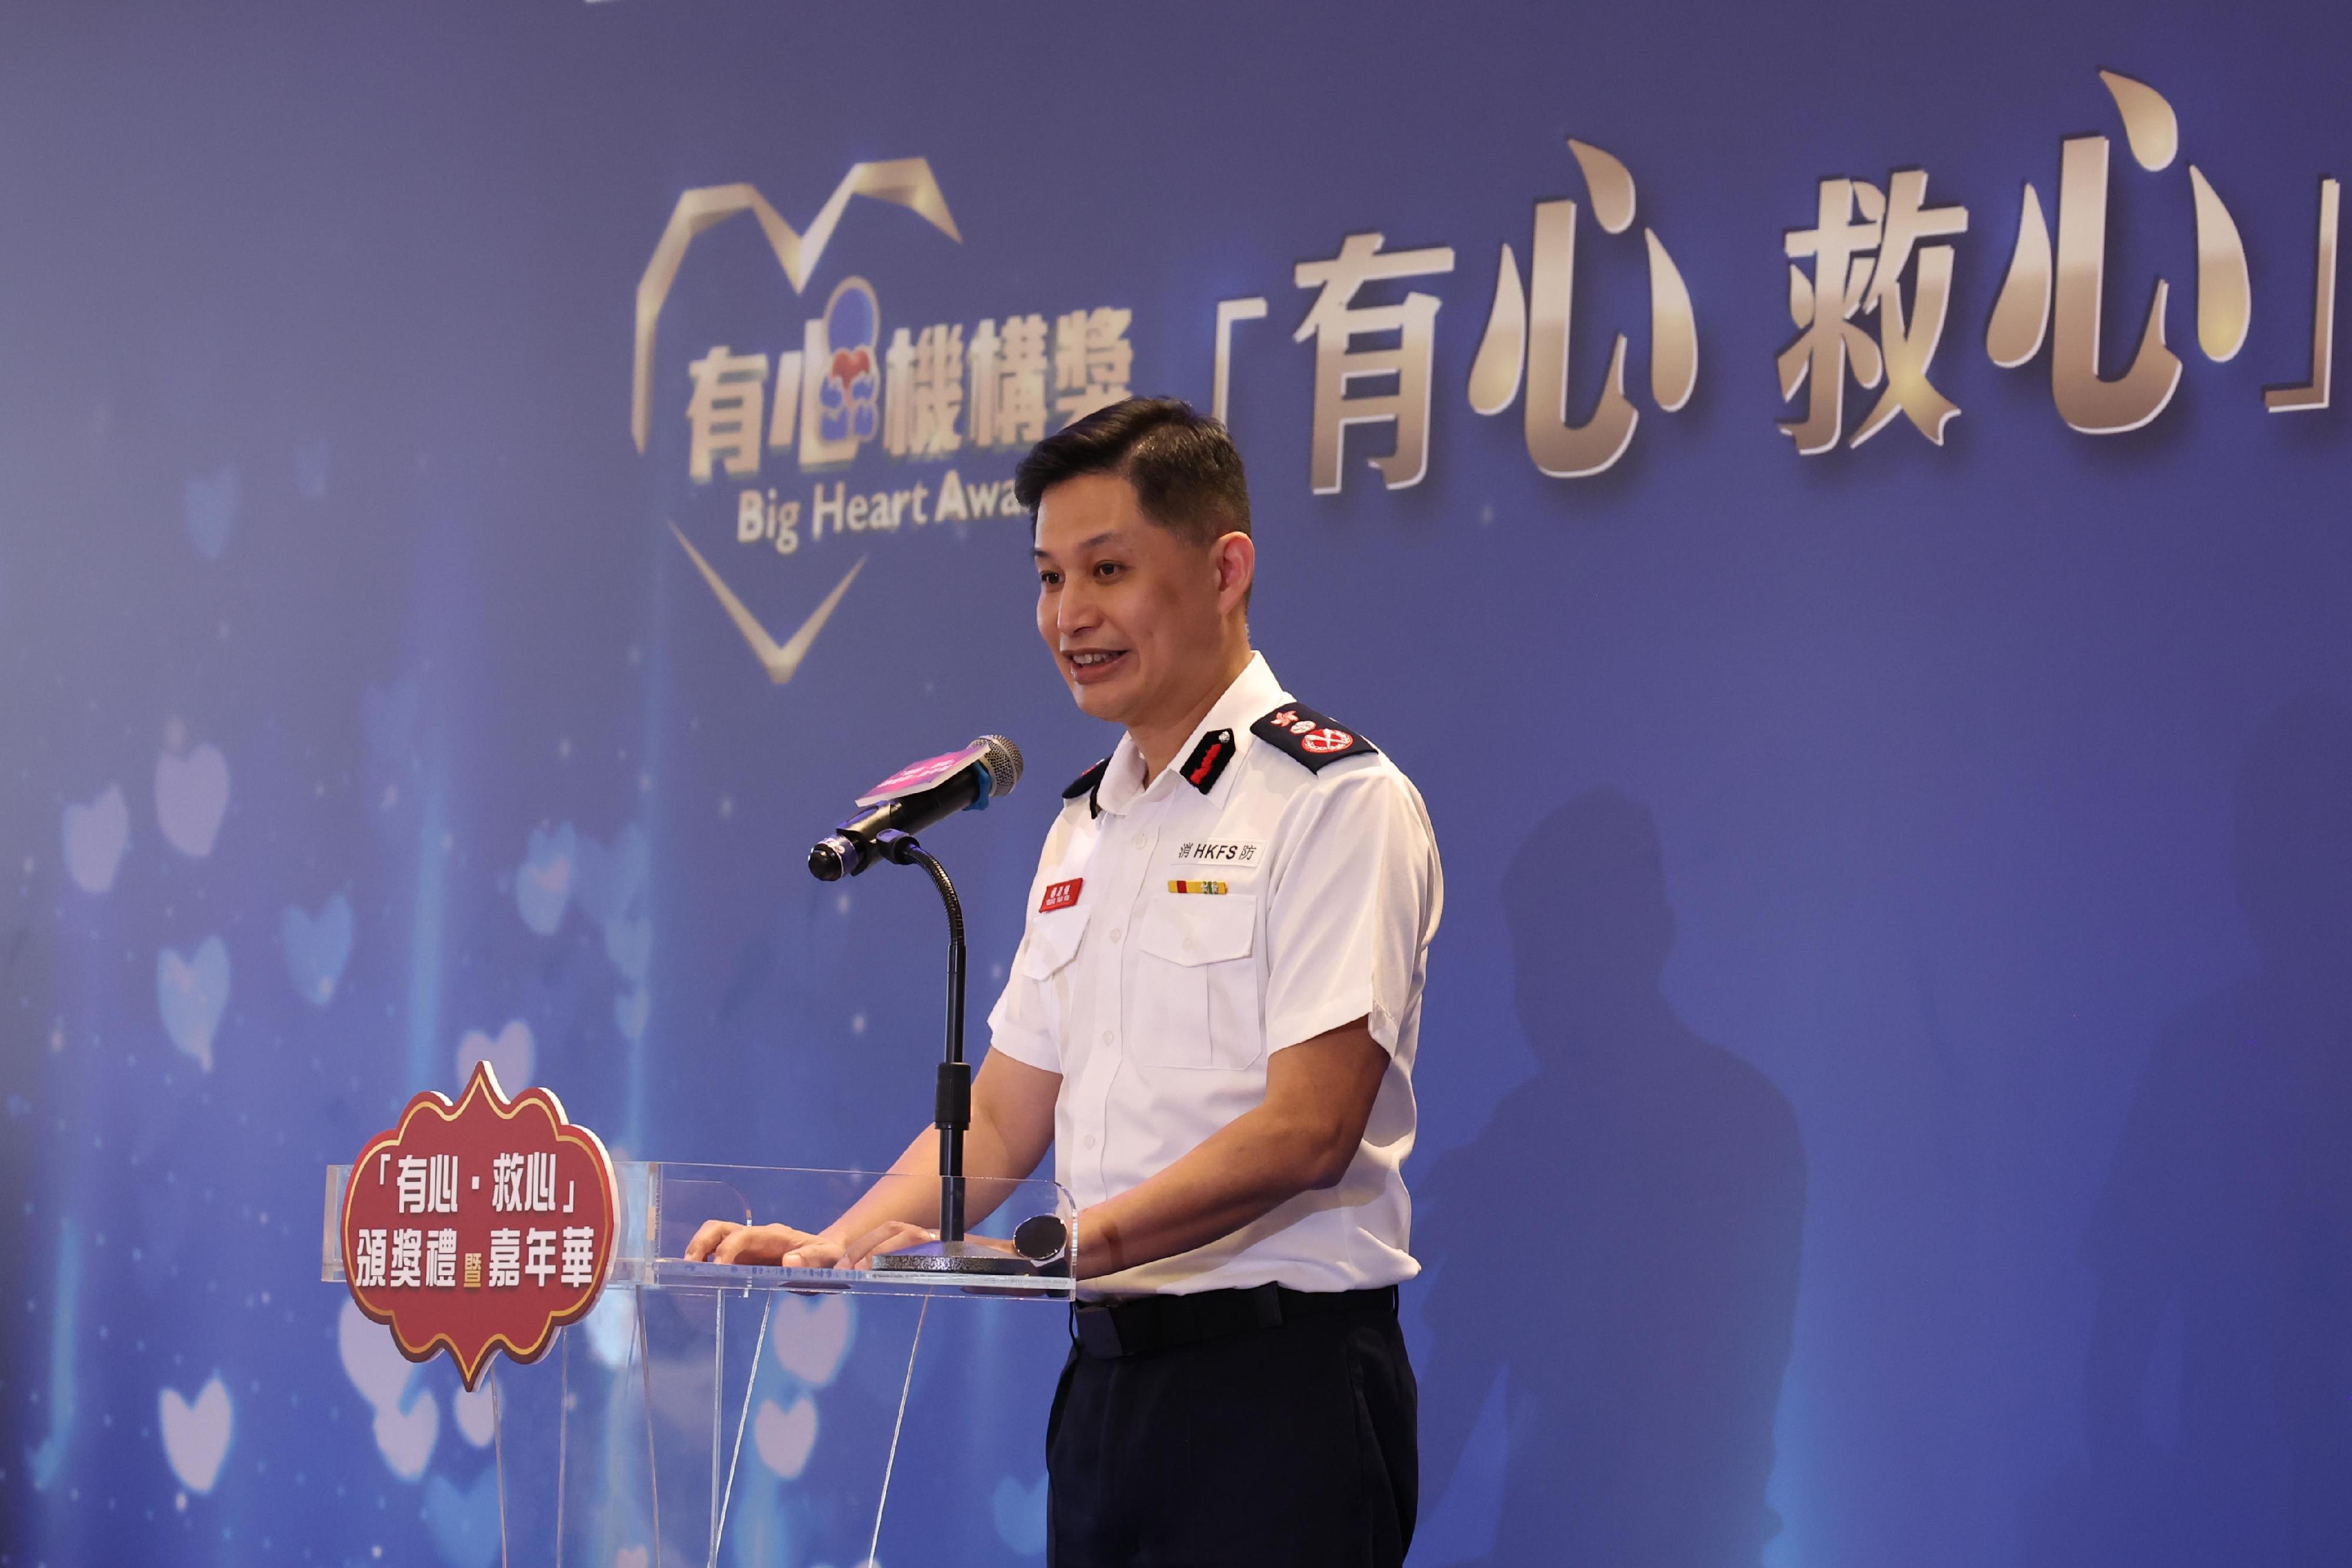 The Fire Services Department today (April 27) held the Big Hearts, Save Hearts Awards Ceremony cum Carnival. Photo shows the Director of Fire Services, Mr Andy Yeung, delivering a speech at the event.